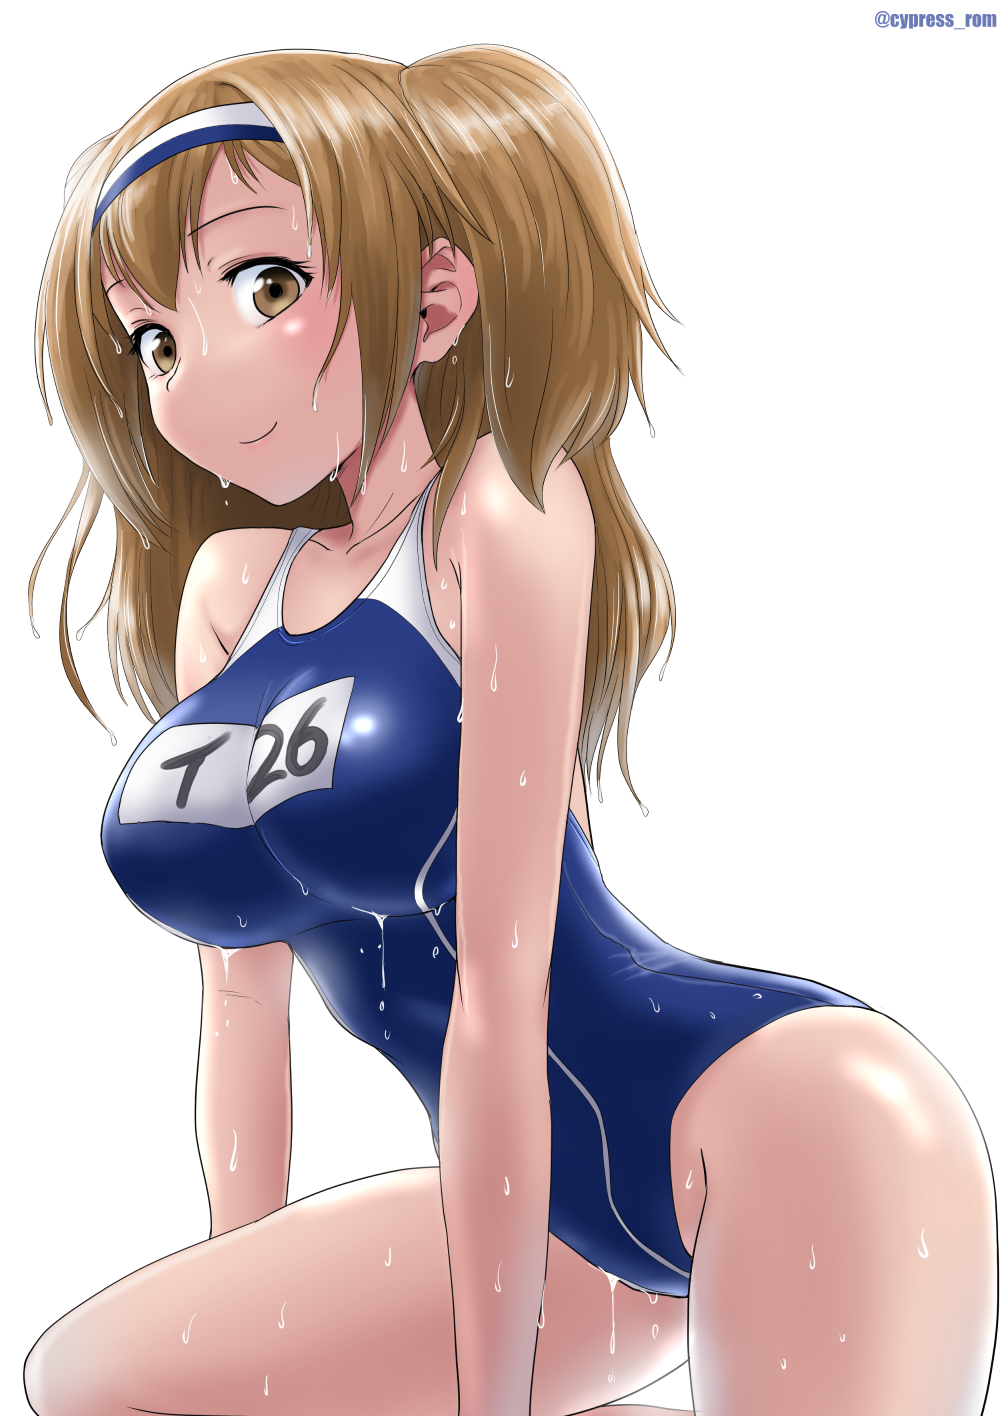 Anime 1003x1416 anime anime girls Kantai Collection I-26 (KanColle) twintails brunette solo artwork digital art fan art one-piece swimsuit wet body big boobs